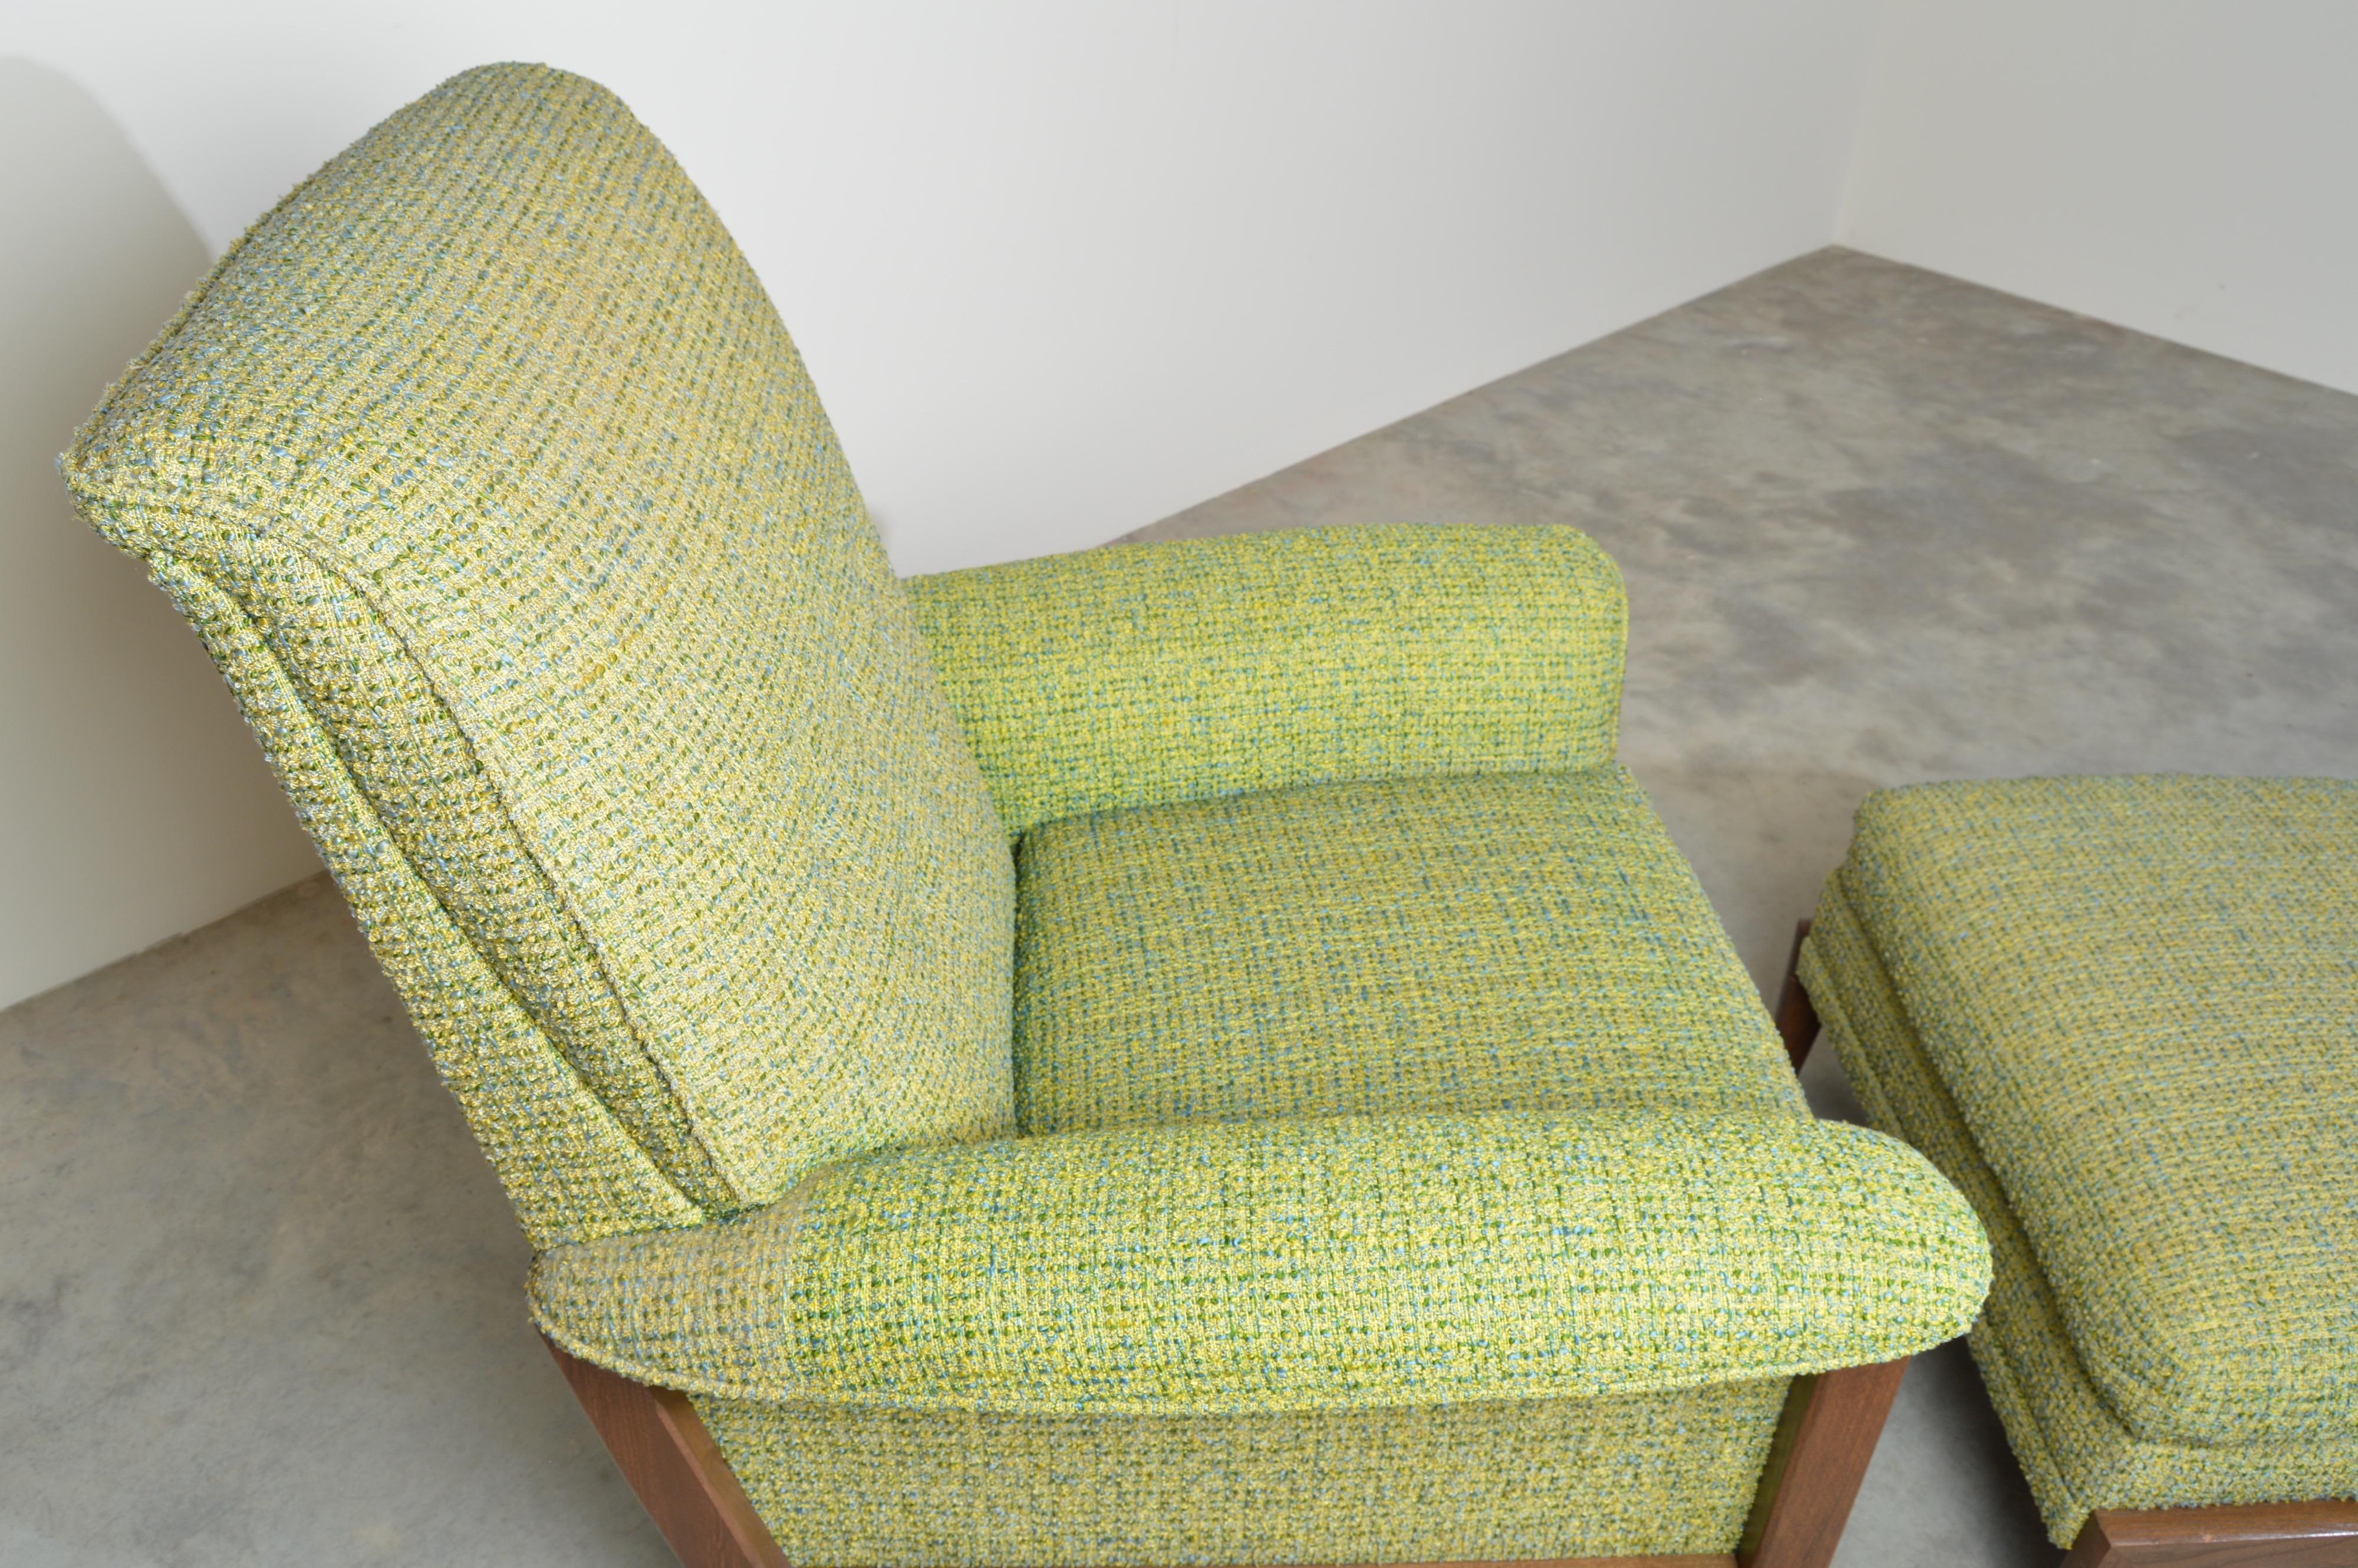 Fired Midcentury Lounge Chair and Ottoman by Kroehler after Paul McCobb